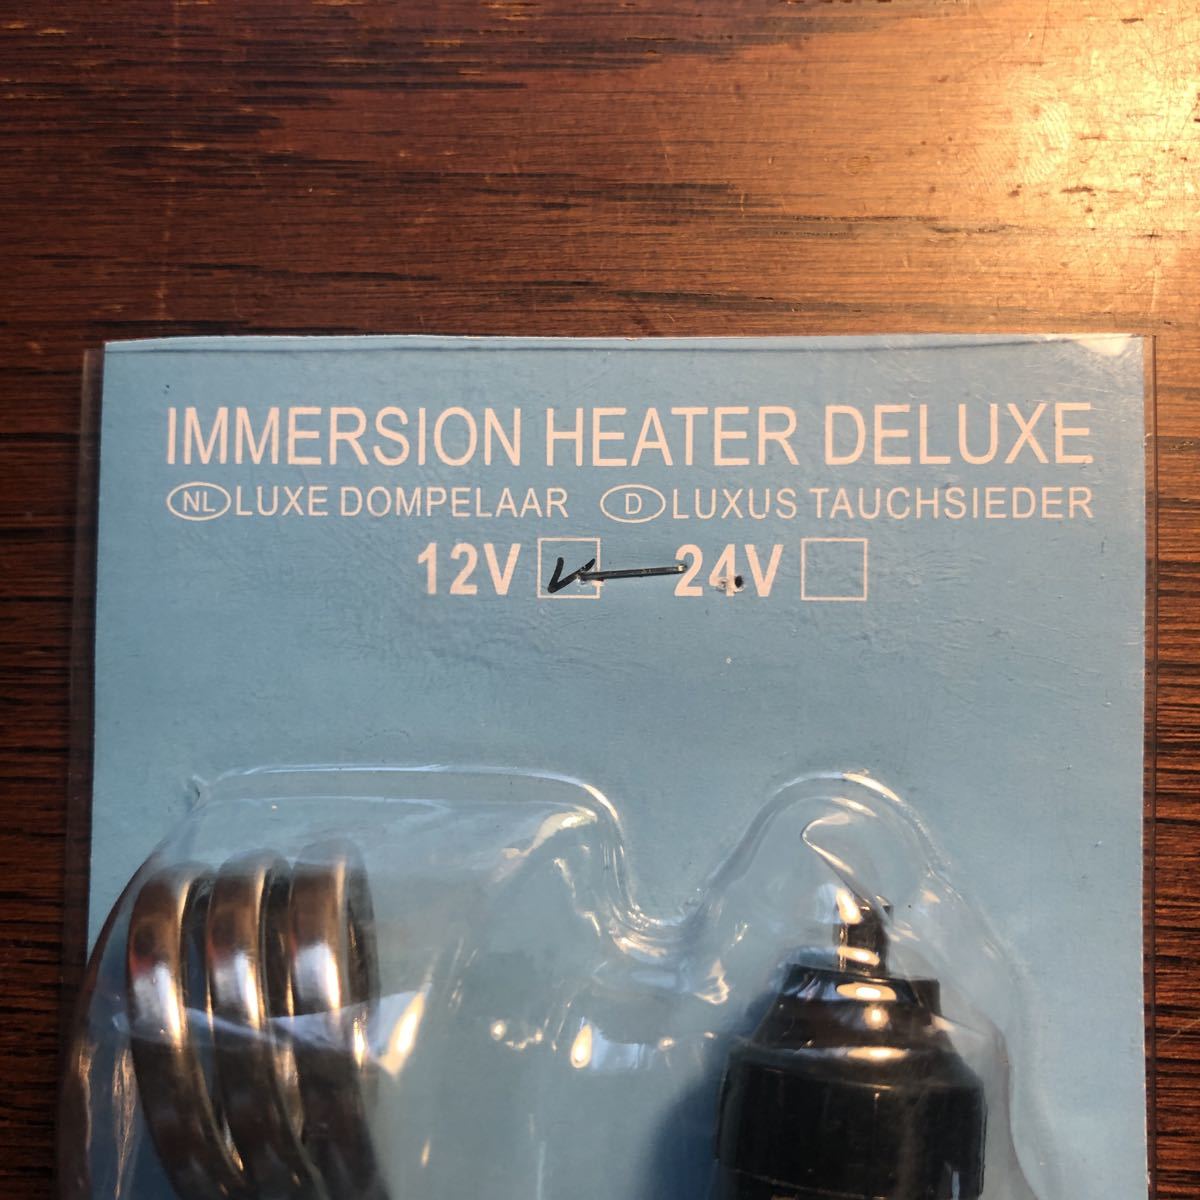 12V DC ヒーター　湯沸かし　IMMERSION HEATER DELUXE